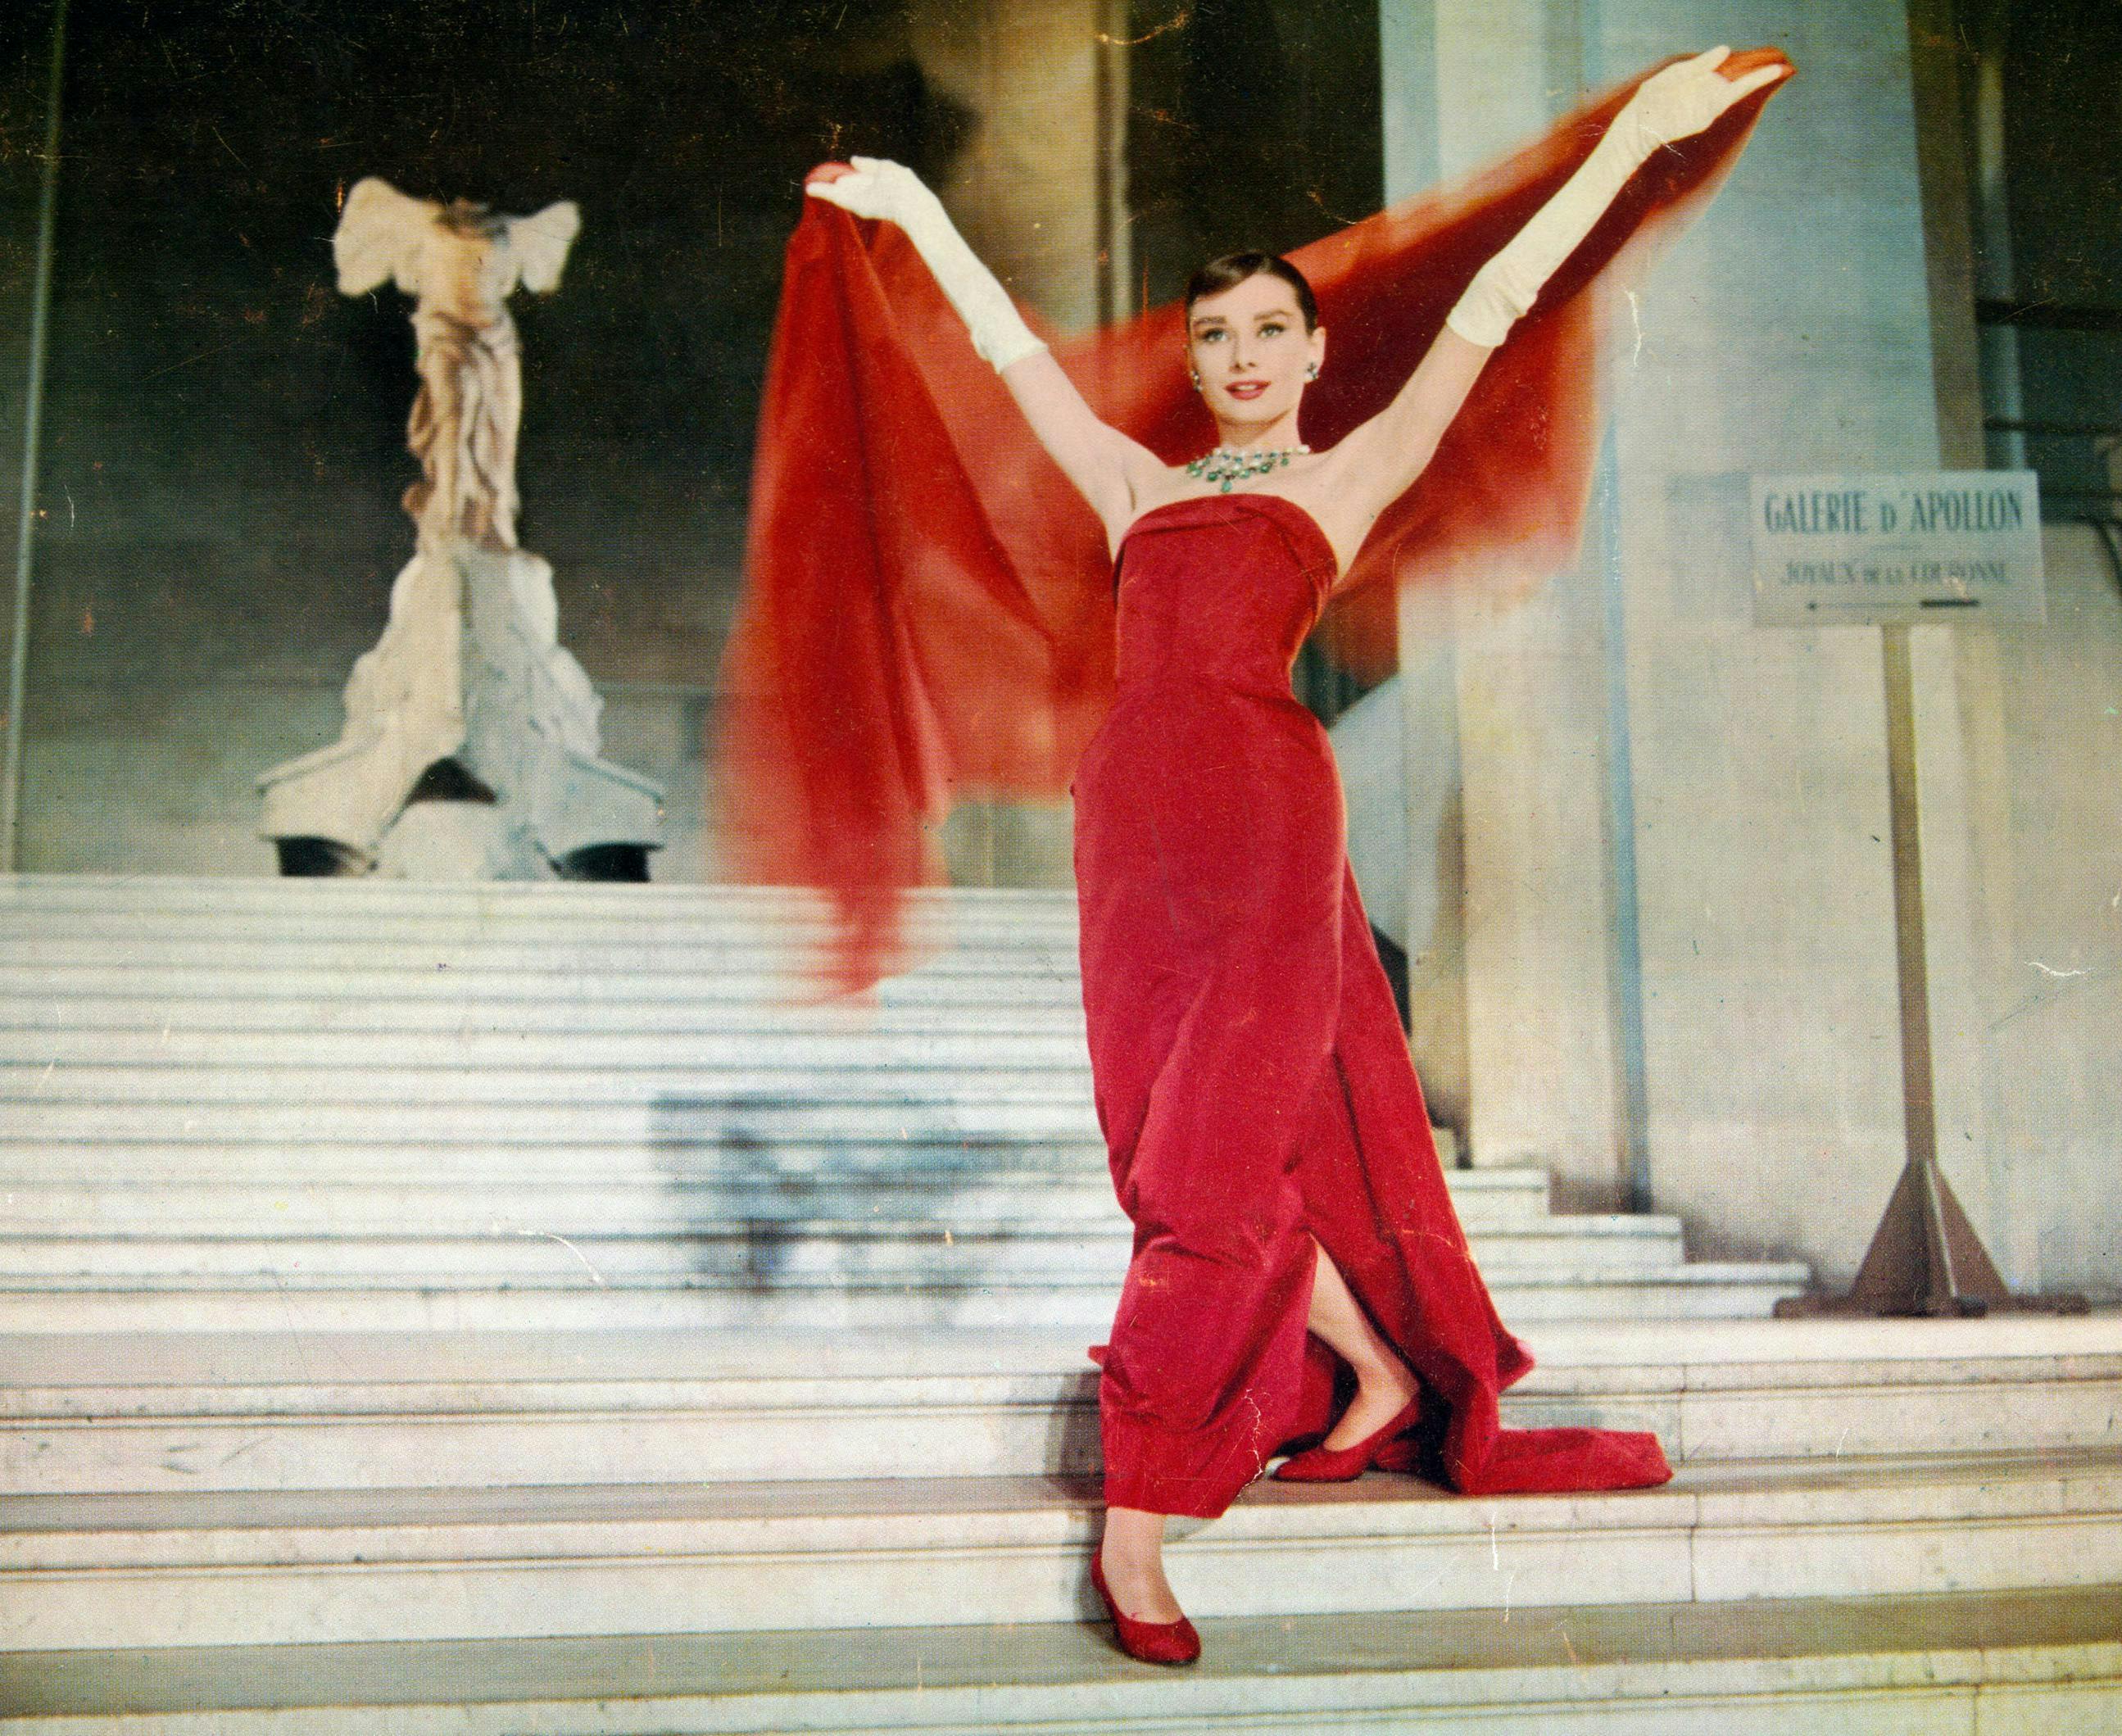 1950s comedy fashion france louvre musical paris red dress romance winged victory dance pose leisure activities performer person human dance flamenco